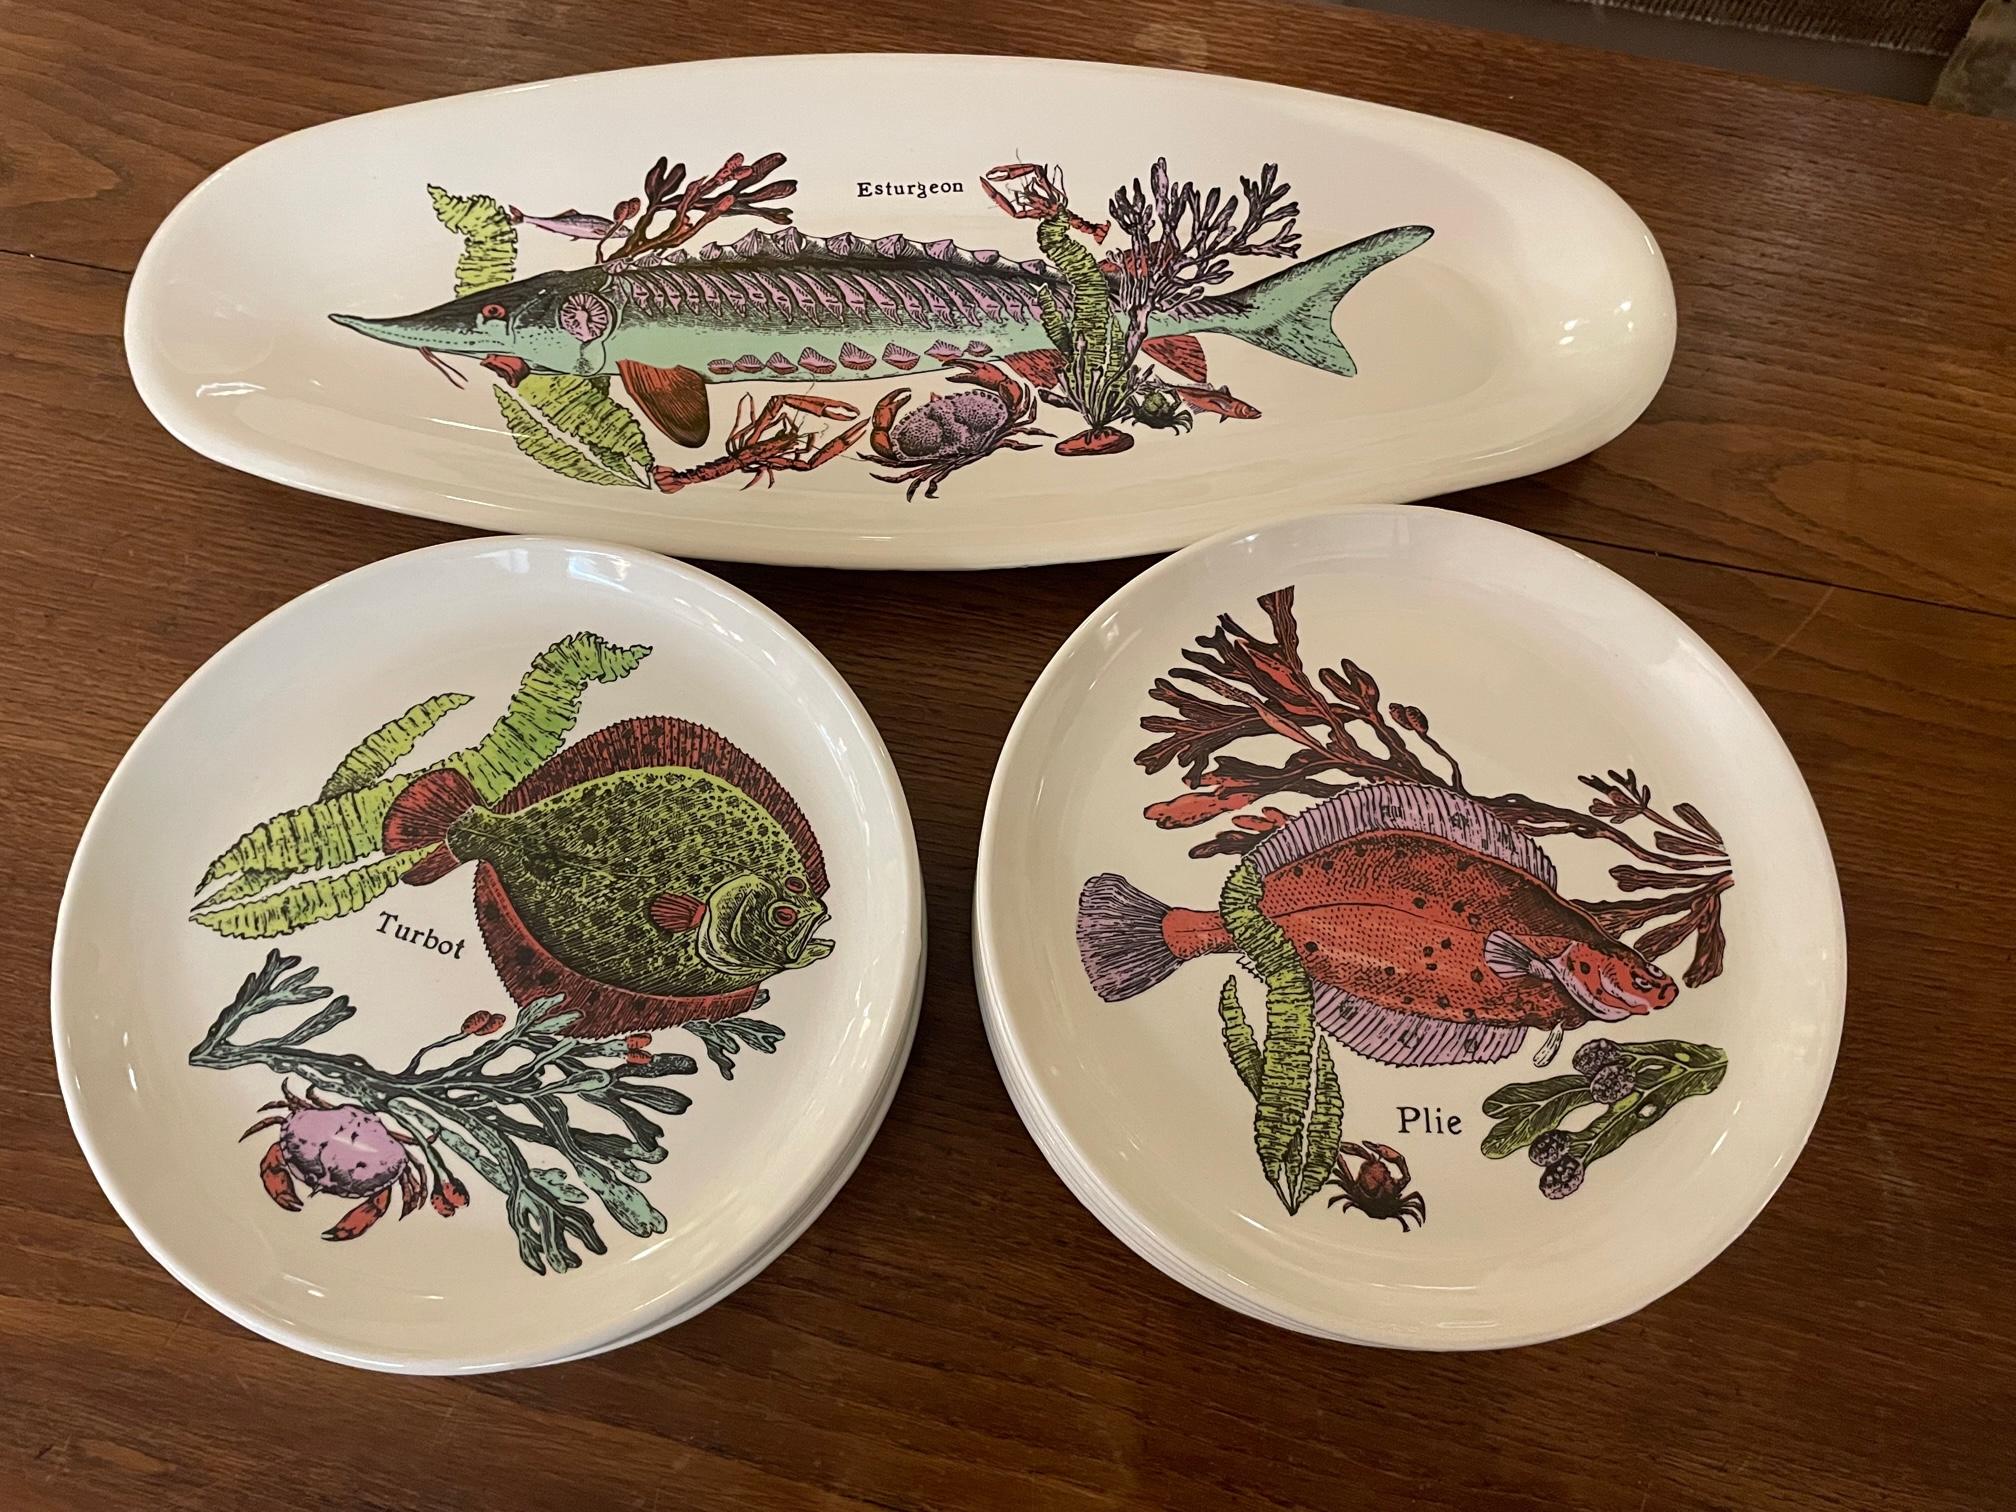 Rare Fish set from the 1970s made in the Sarreguemines Faiencerie in France. 
Twelve plates representing a species of fish, two species by plates and a large plater.  